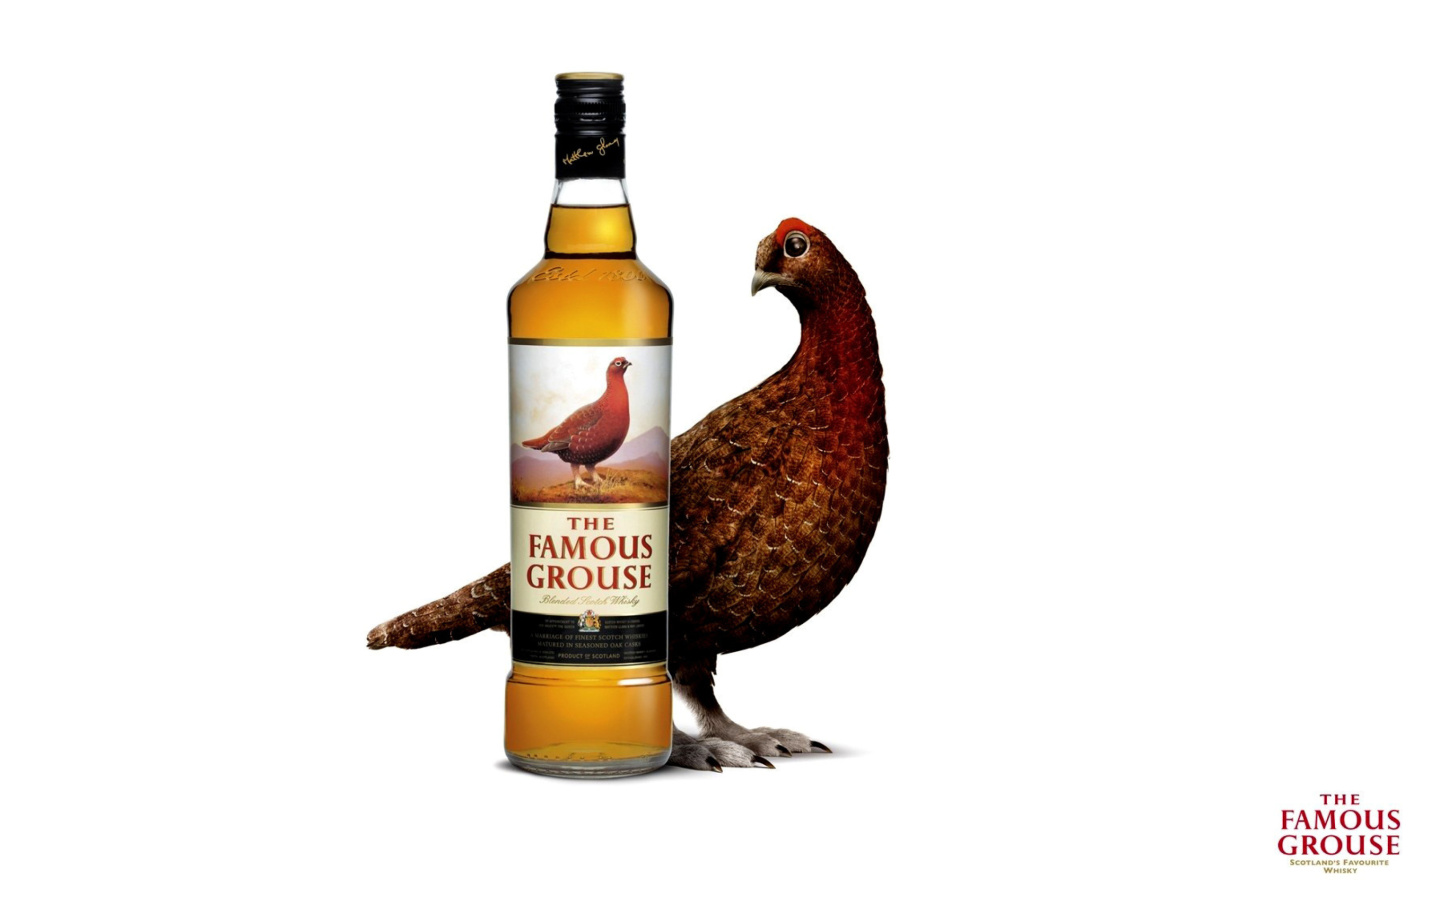 Das The Famous Grouse Scotch Whisky Wallpaper 1440x900